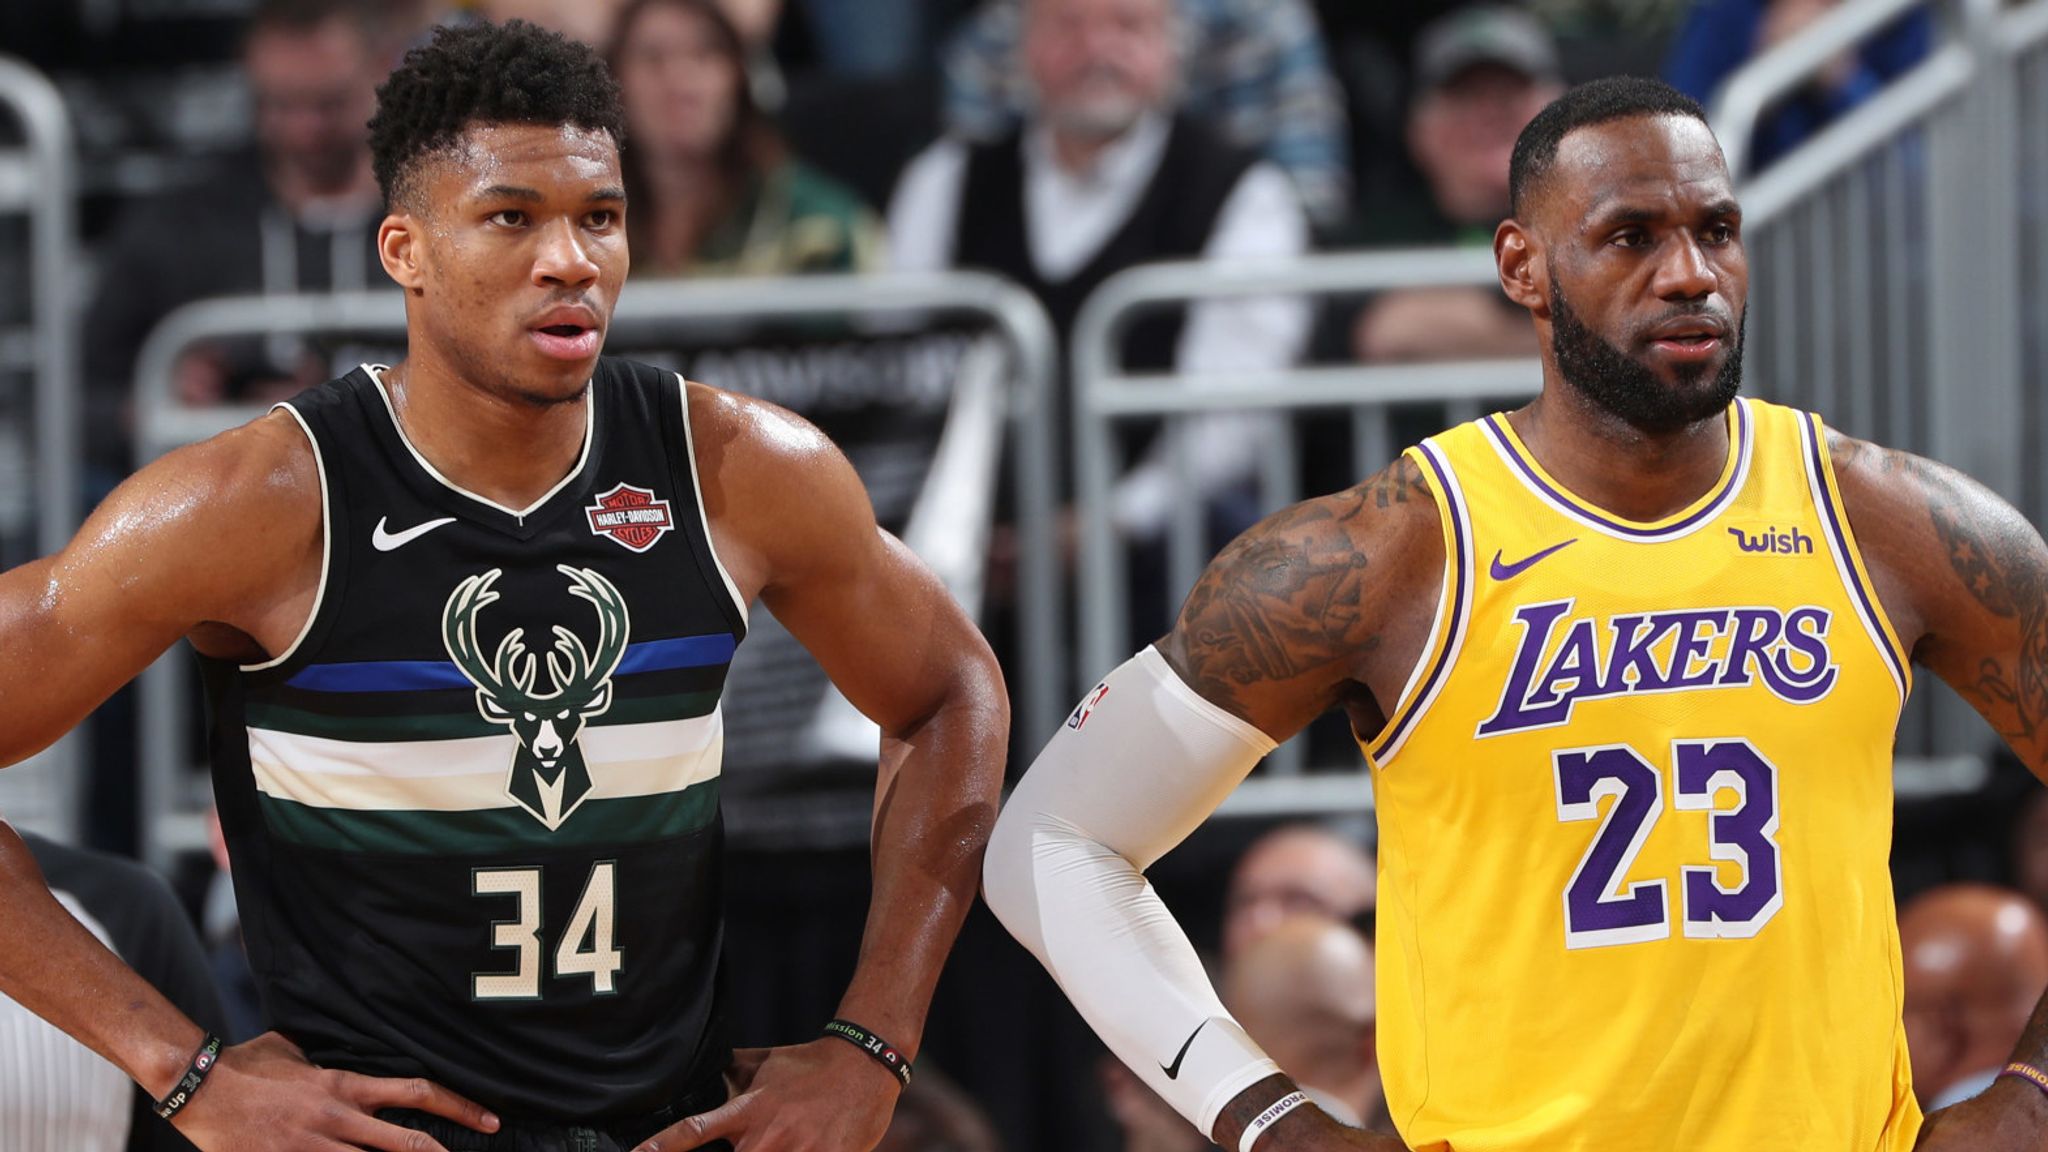 Giannis Antetokounmpo is dominating but no one seems to care